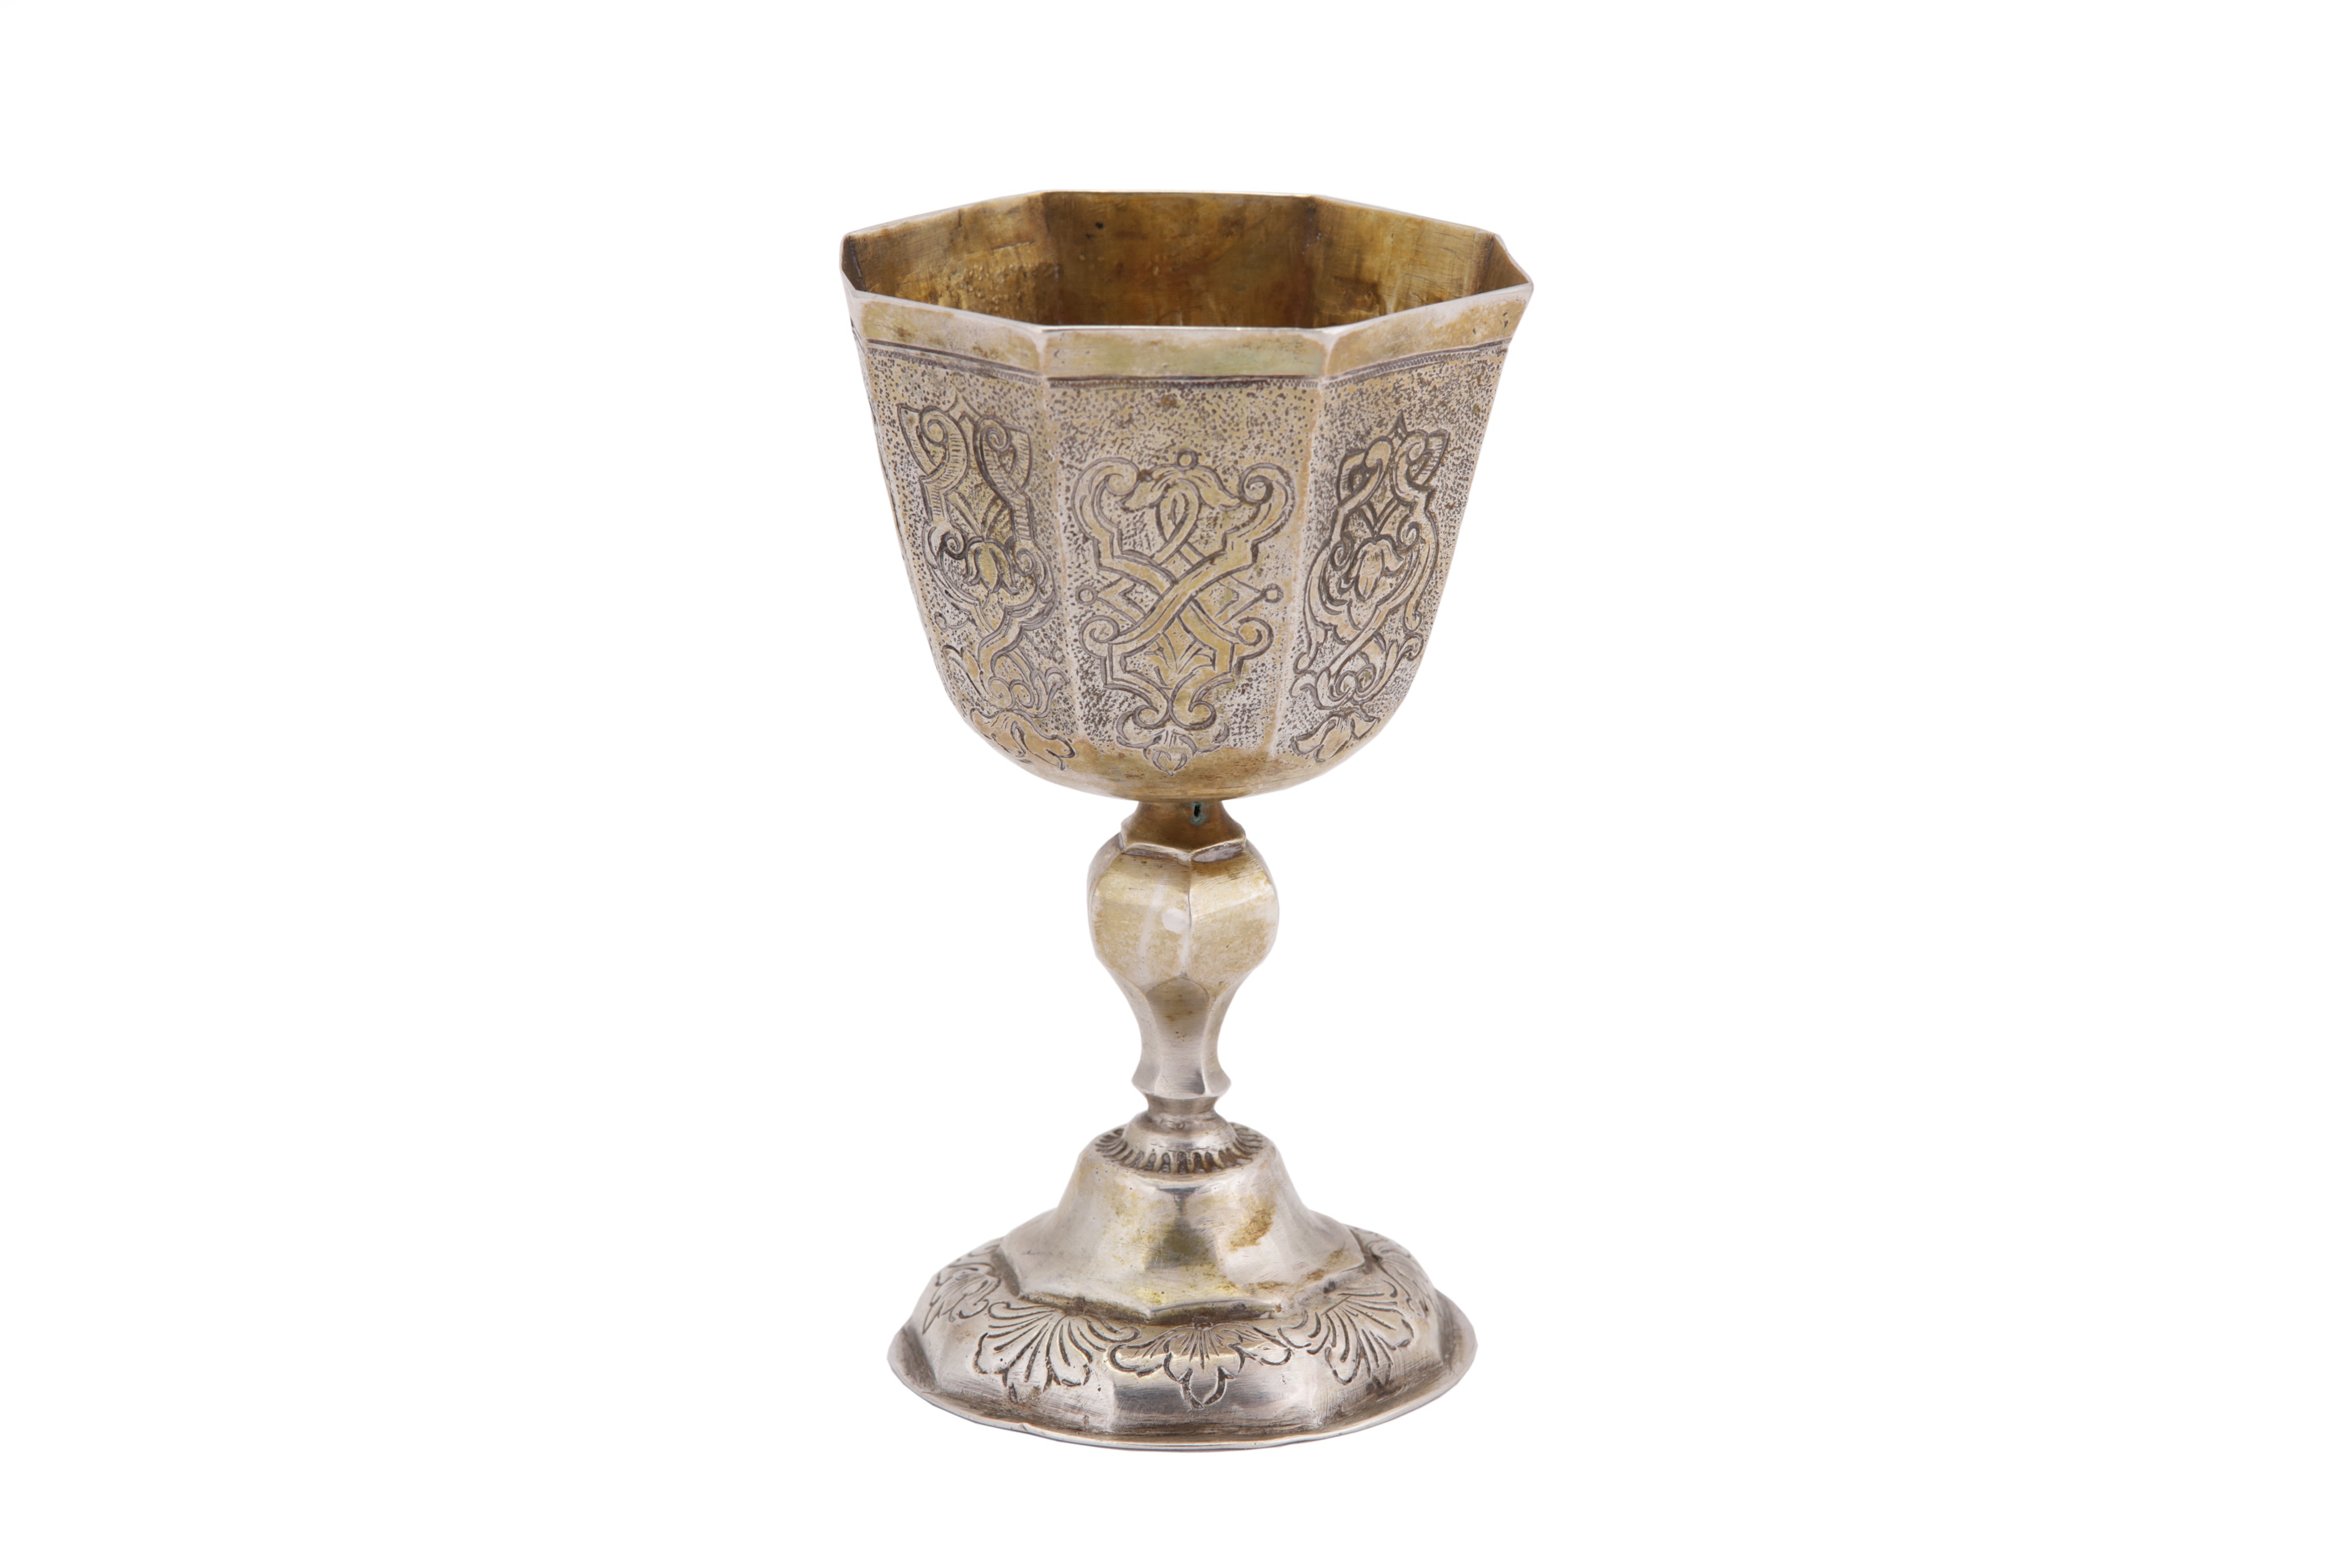 Bonhams : A German silver-gilt standing cup and cover Unknown maker's mark  of 'an orb', Augsburg circa 1615